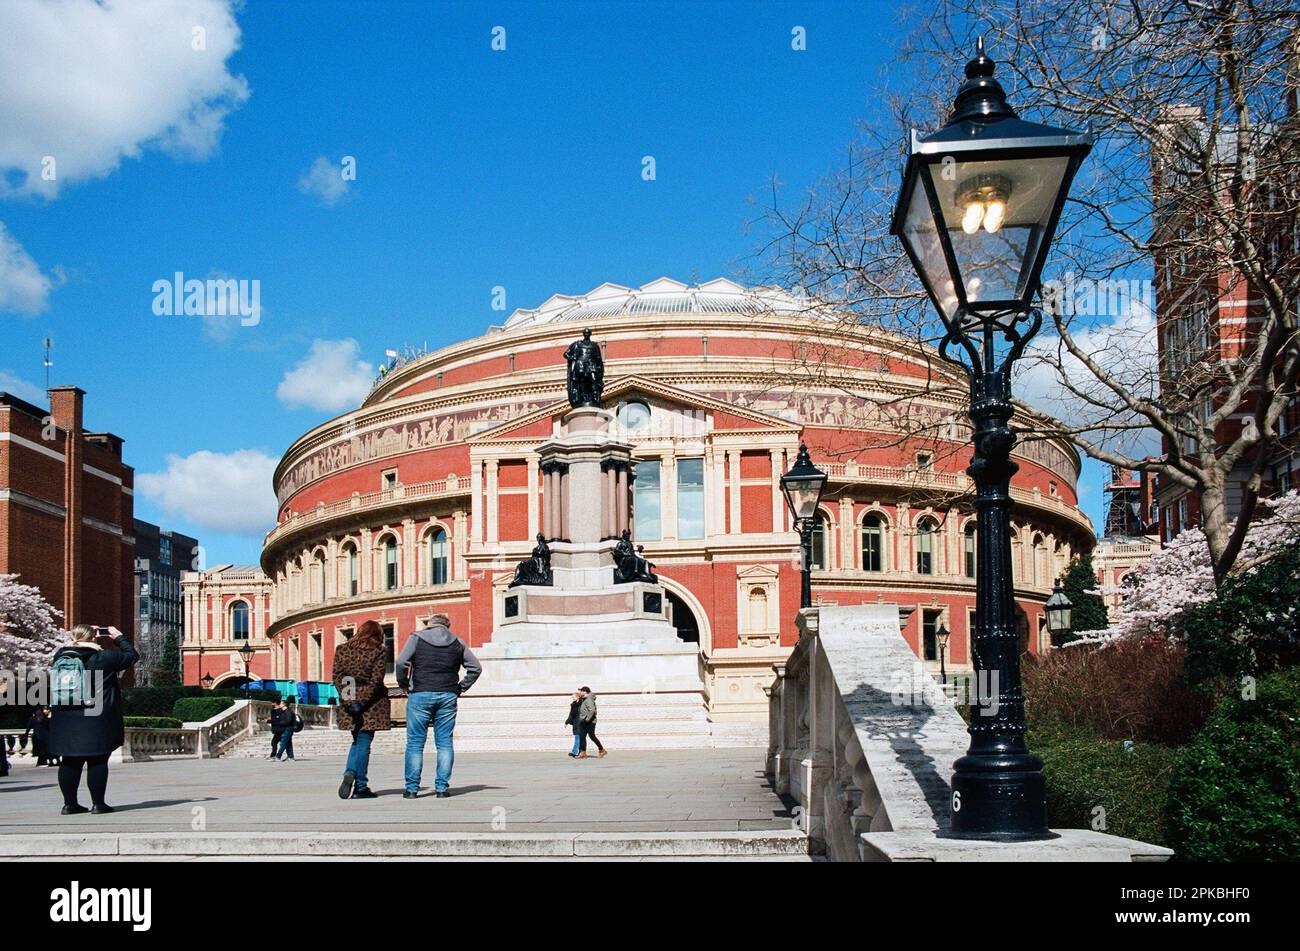 The exterior of the Royal Albert Hall, Kensington, London UK, viewed from the South above Prince Consort Road, with sightseers Stock Photo